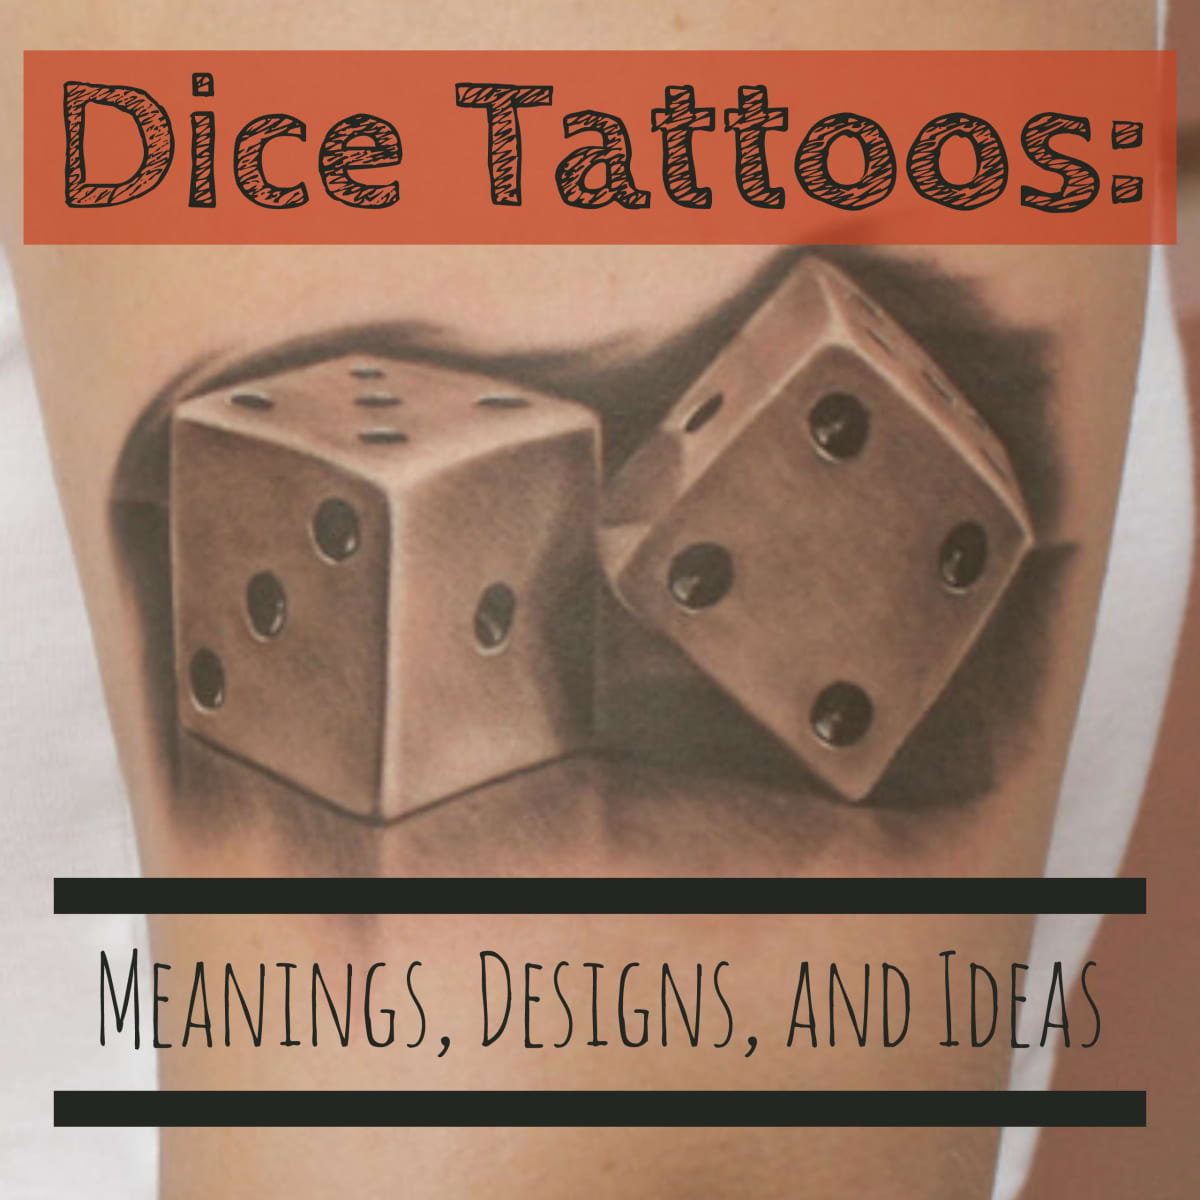 721 Traditional Dice Tattoo Images Stock Photos  Vectors  Shutterstock